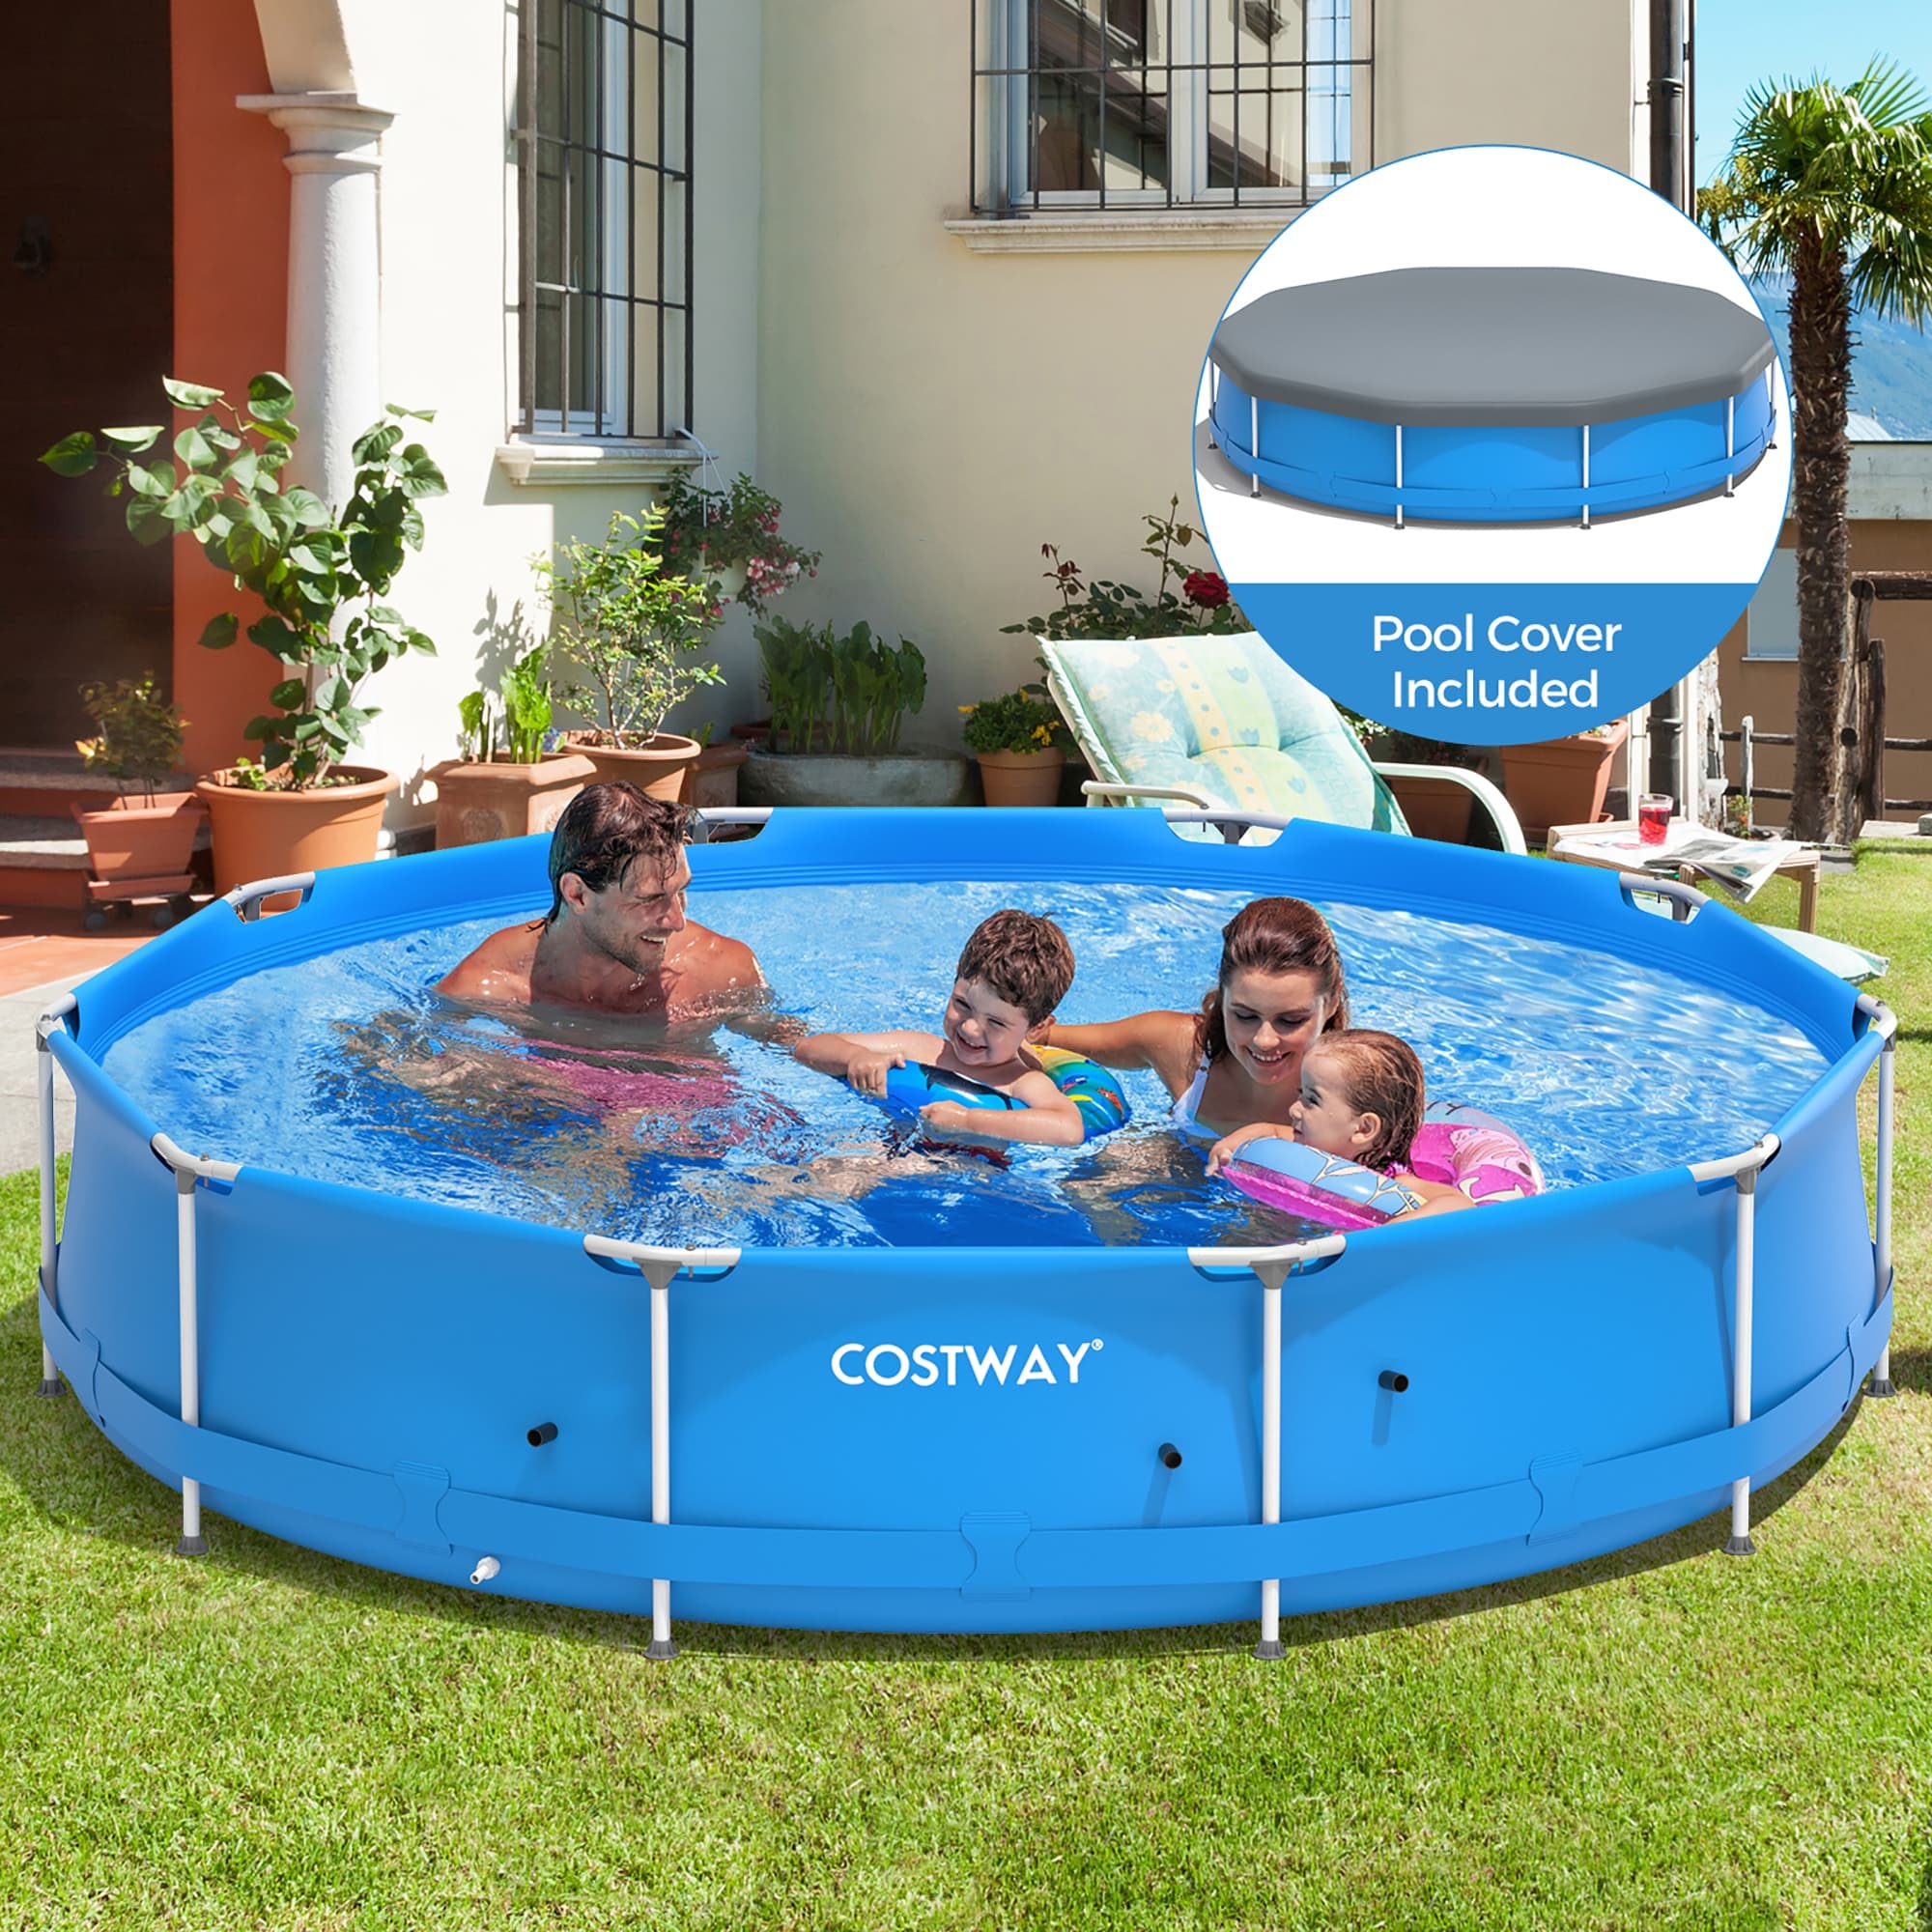 Costway Round Above Ground Swimming Pool Patio Frame Pool W/ Pool - On Sale  - Bed Bath & Beyond - 35779540